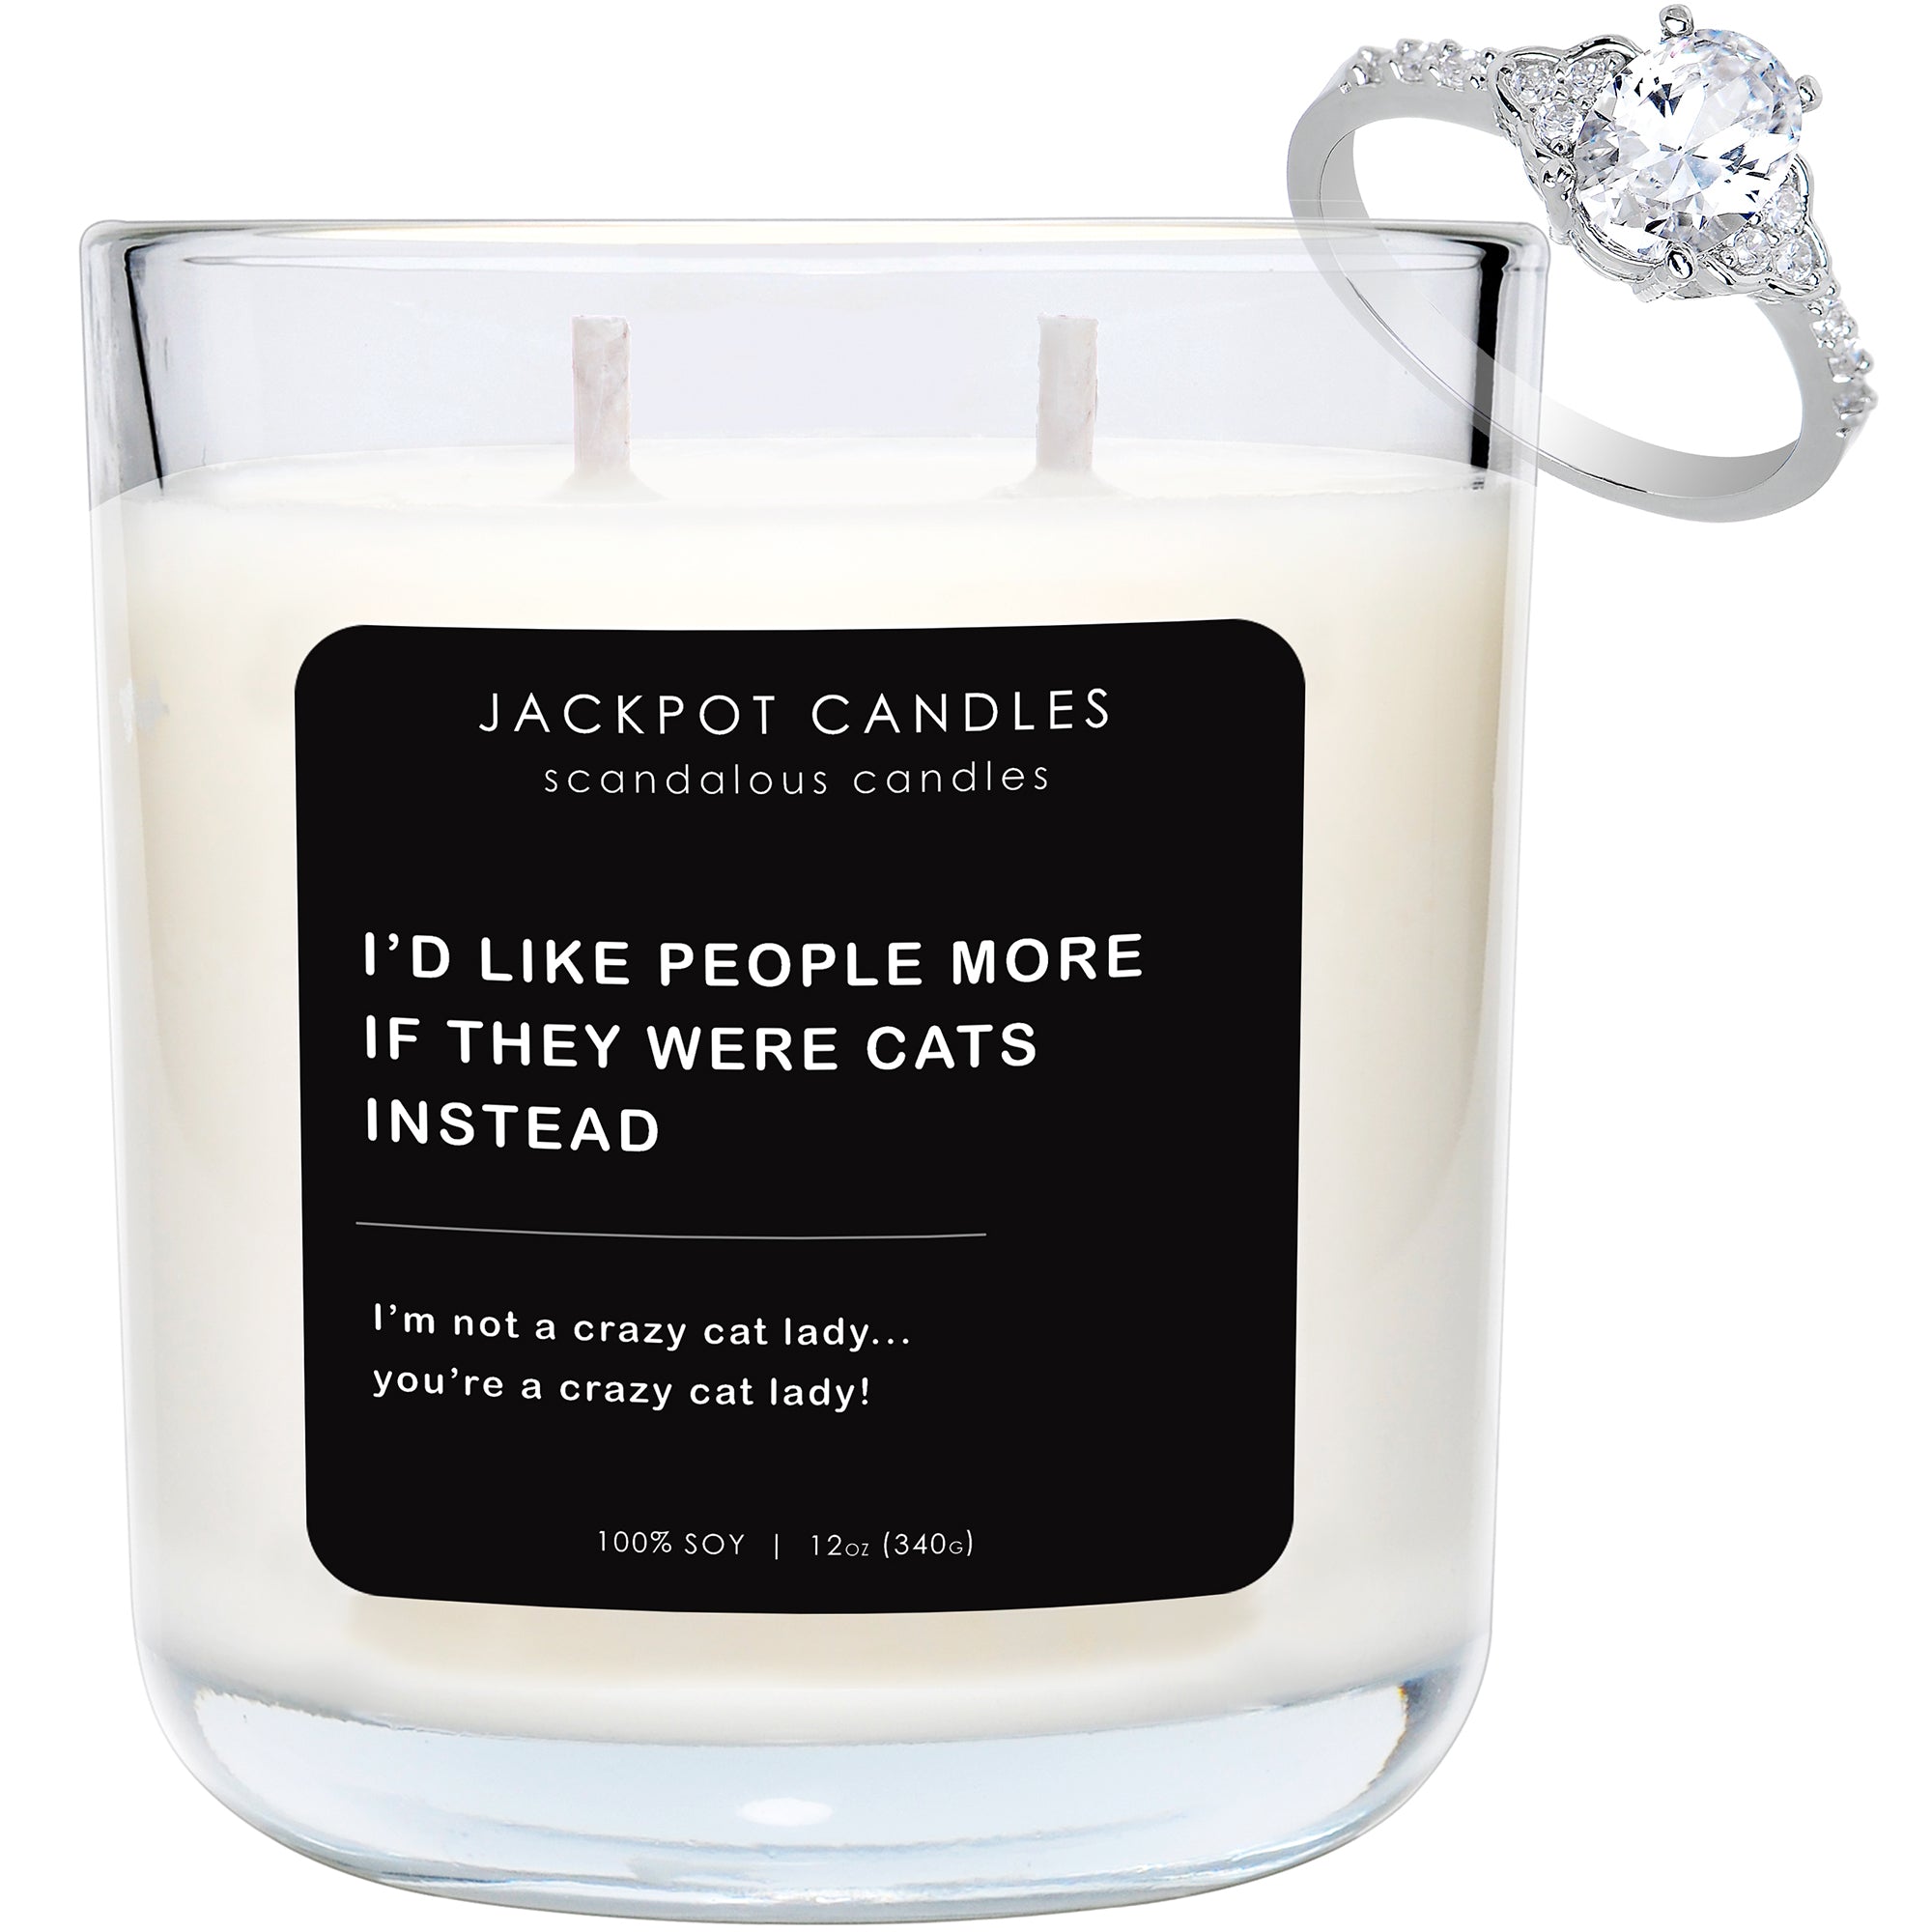 I'd Like People More if They were Cats Instead Scandalous Candle